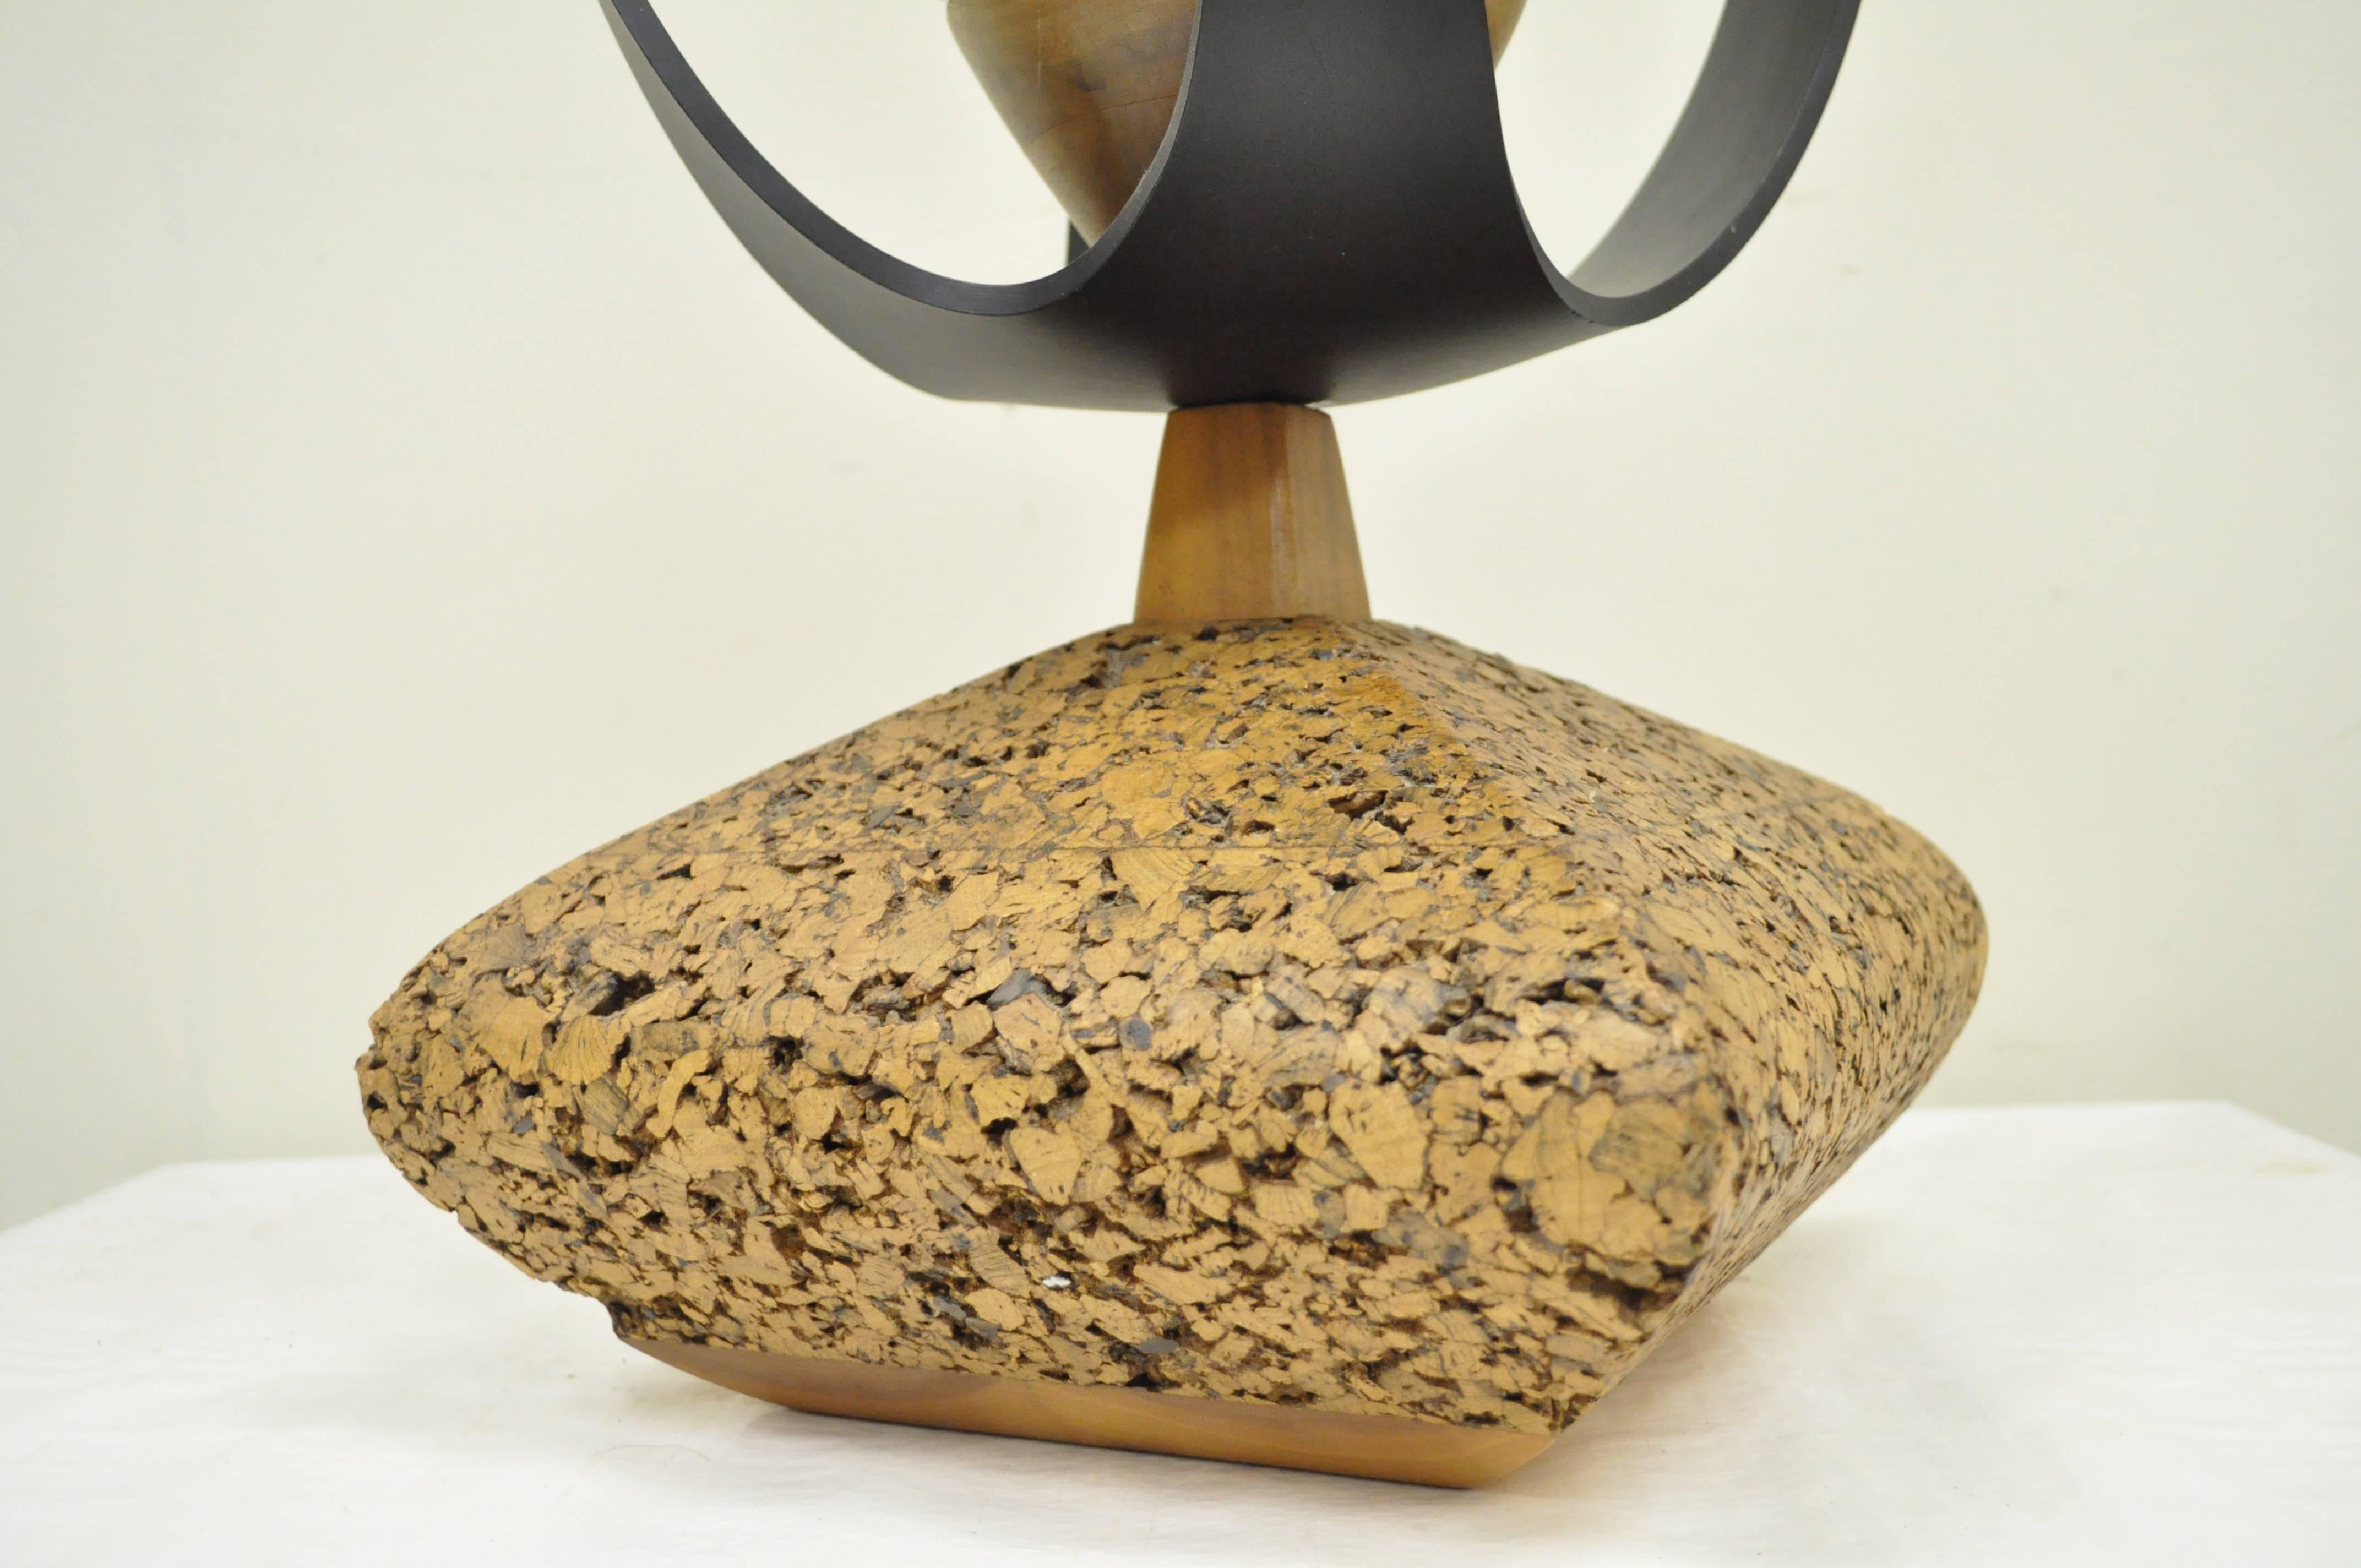 Lynard of California Cork Crackled Glass Walnut Atomic Era Modern Egg Table Lamp In Excellent Condition For Sale In Philadelphia, PA